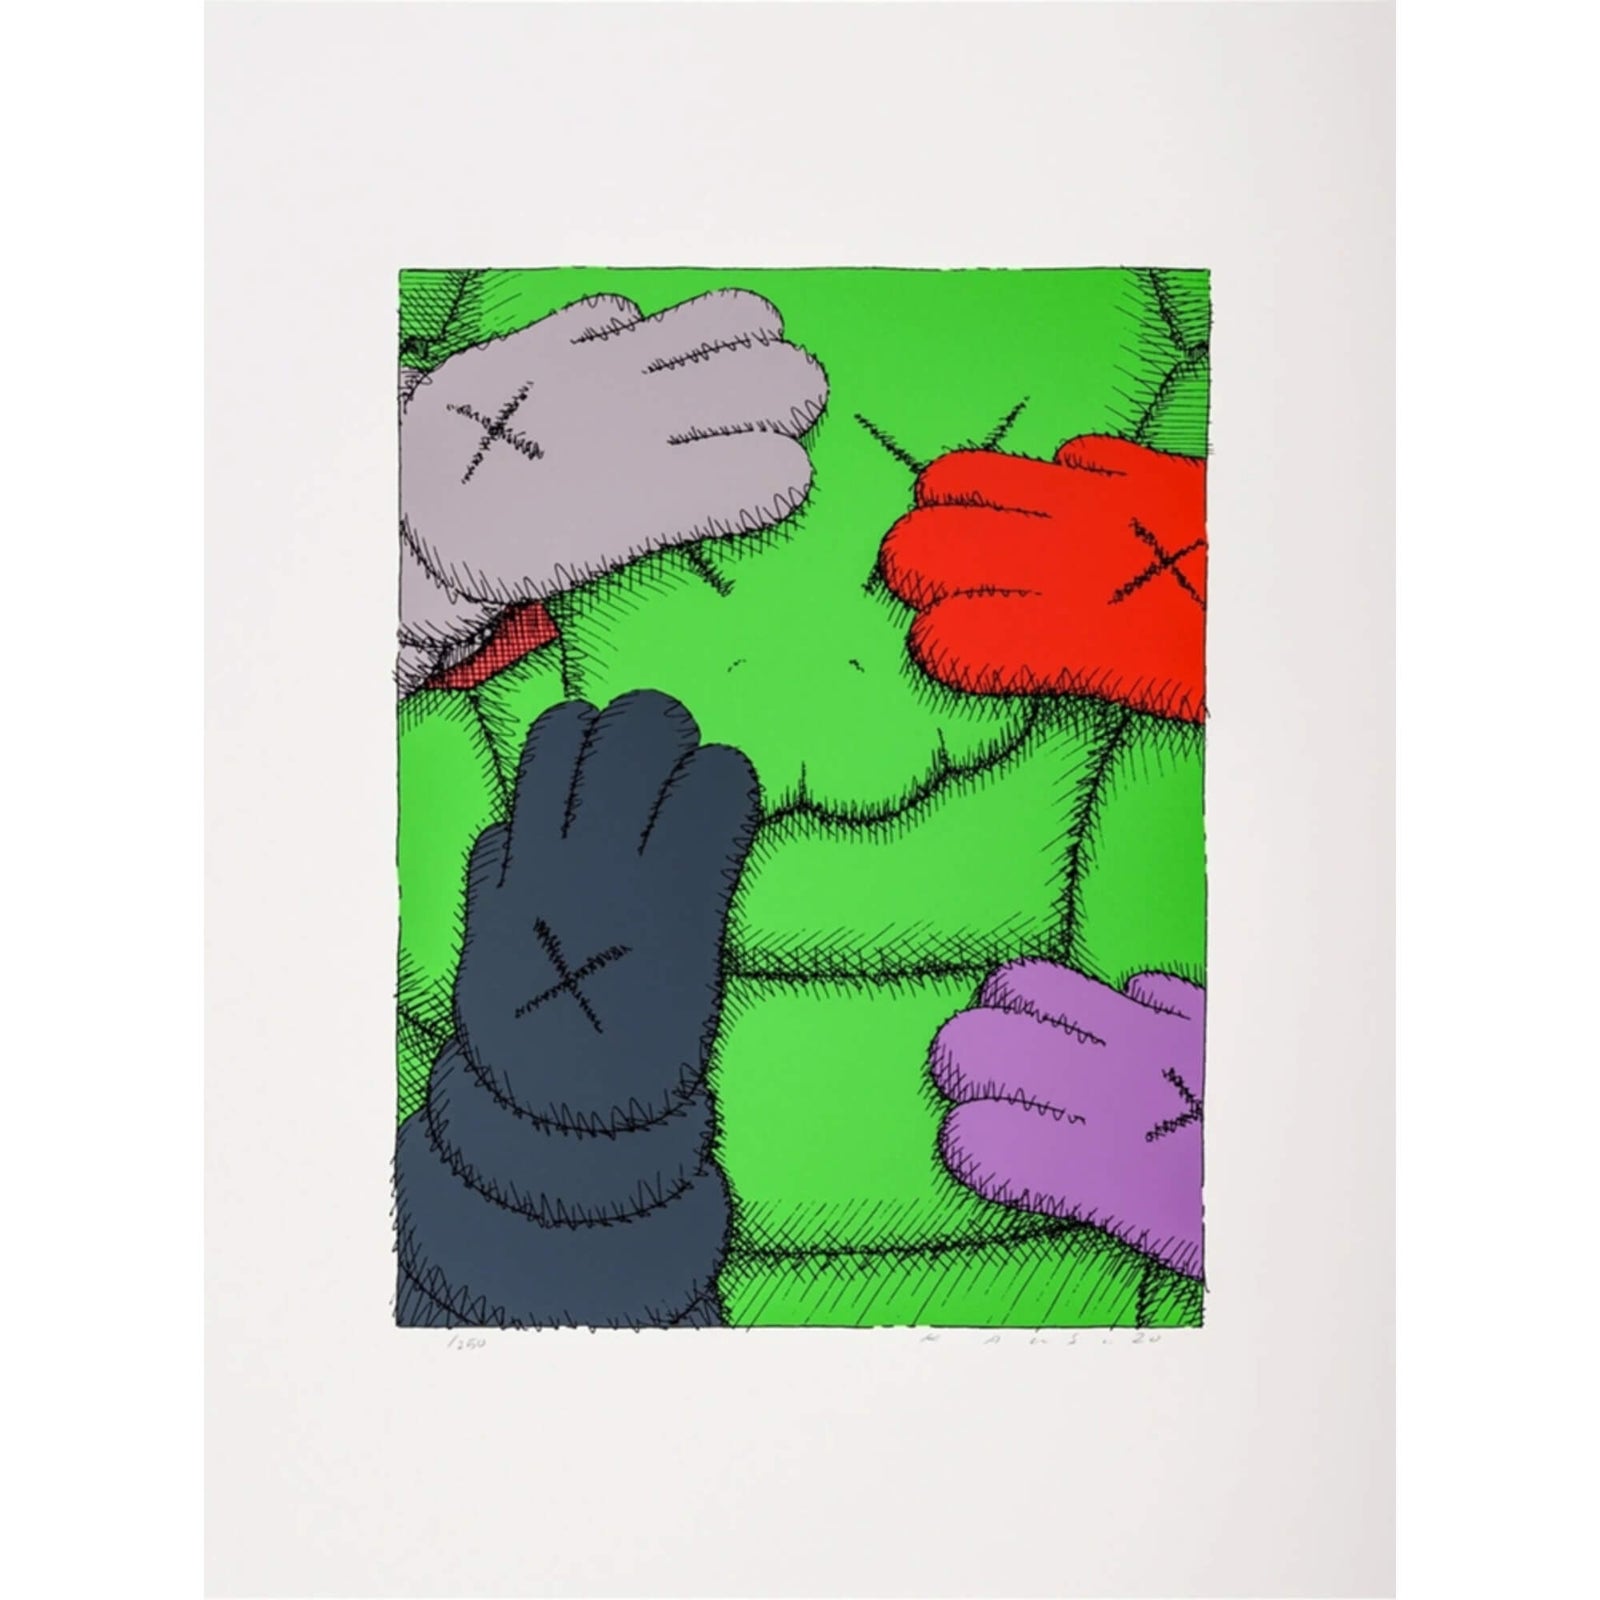 Head To Uniqlo For The Limited-Edition Drop Of Kaws' Art Book